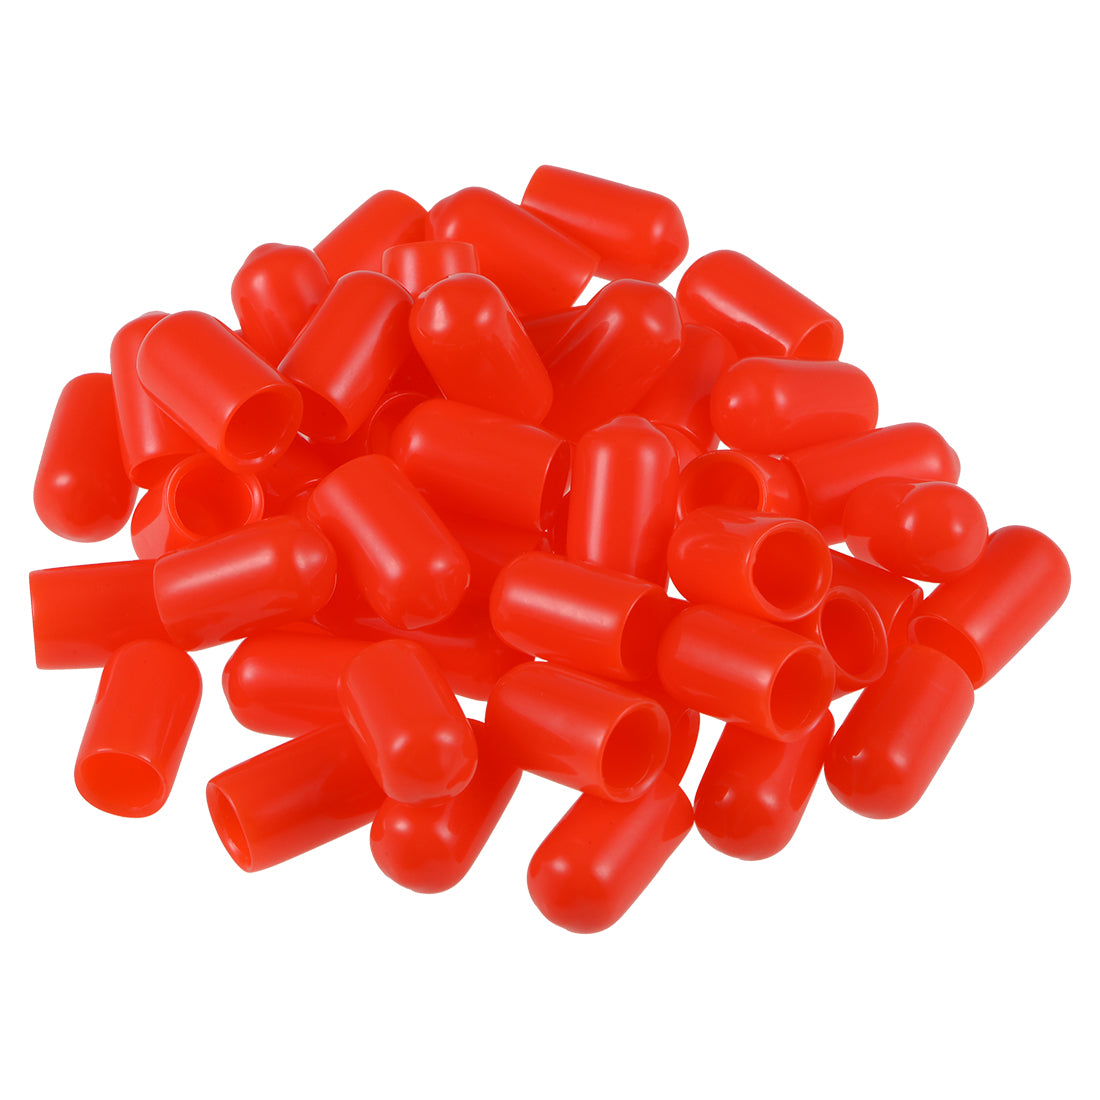 uxcell Uxcell 80pcs Rubber End Caps 7.5mm ID 15mm Height Screw Thread Protectors Red